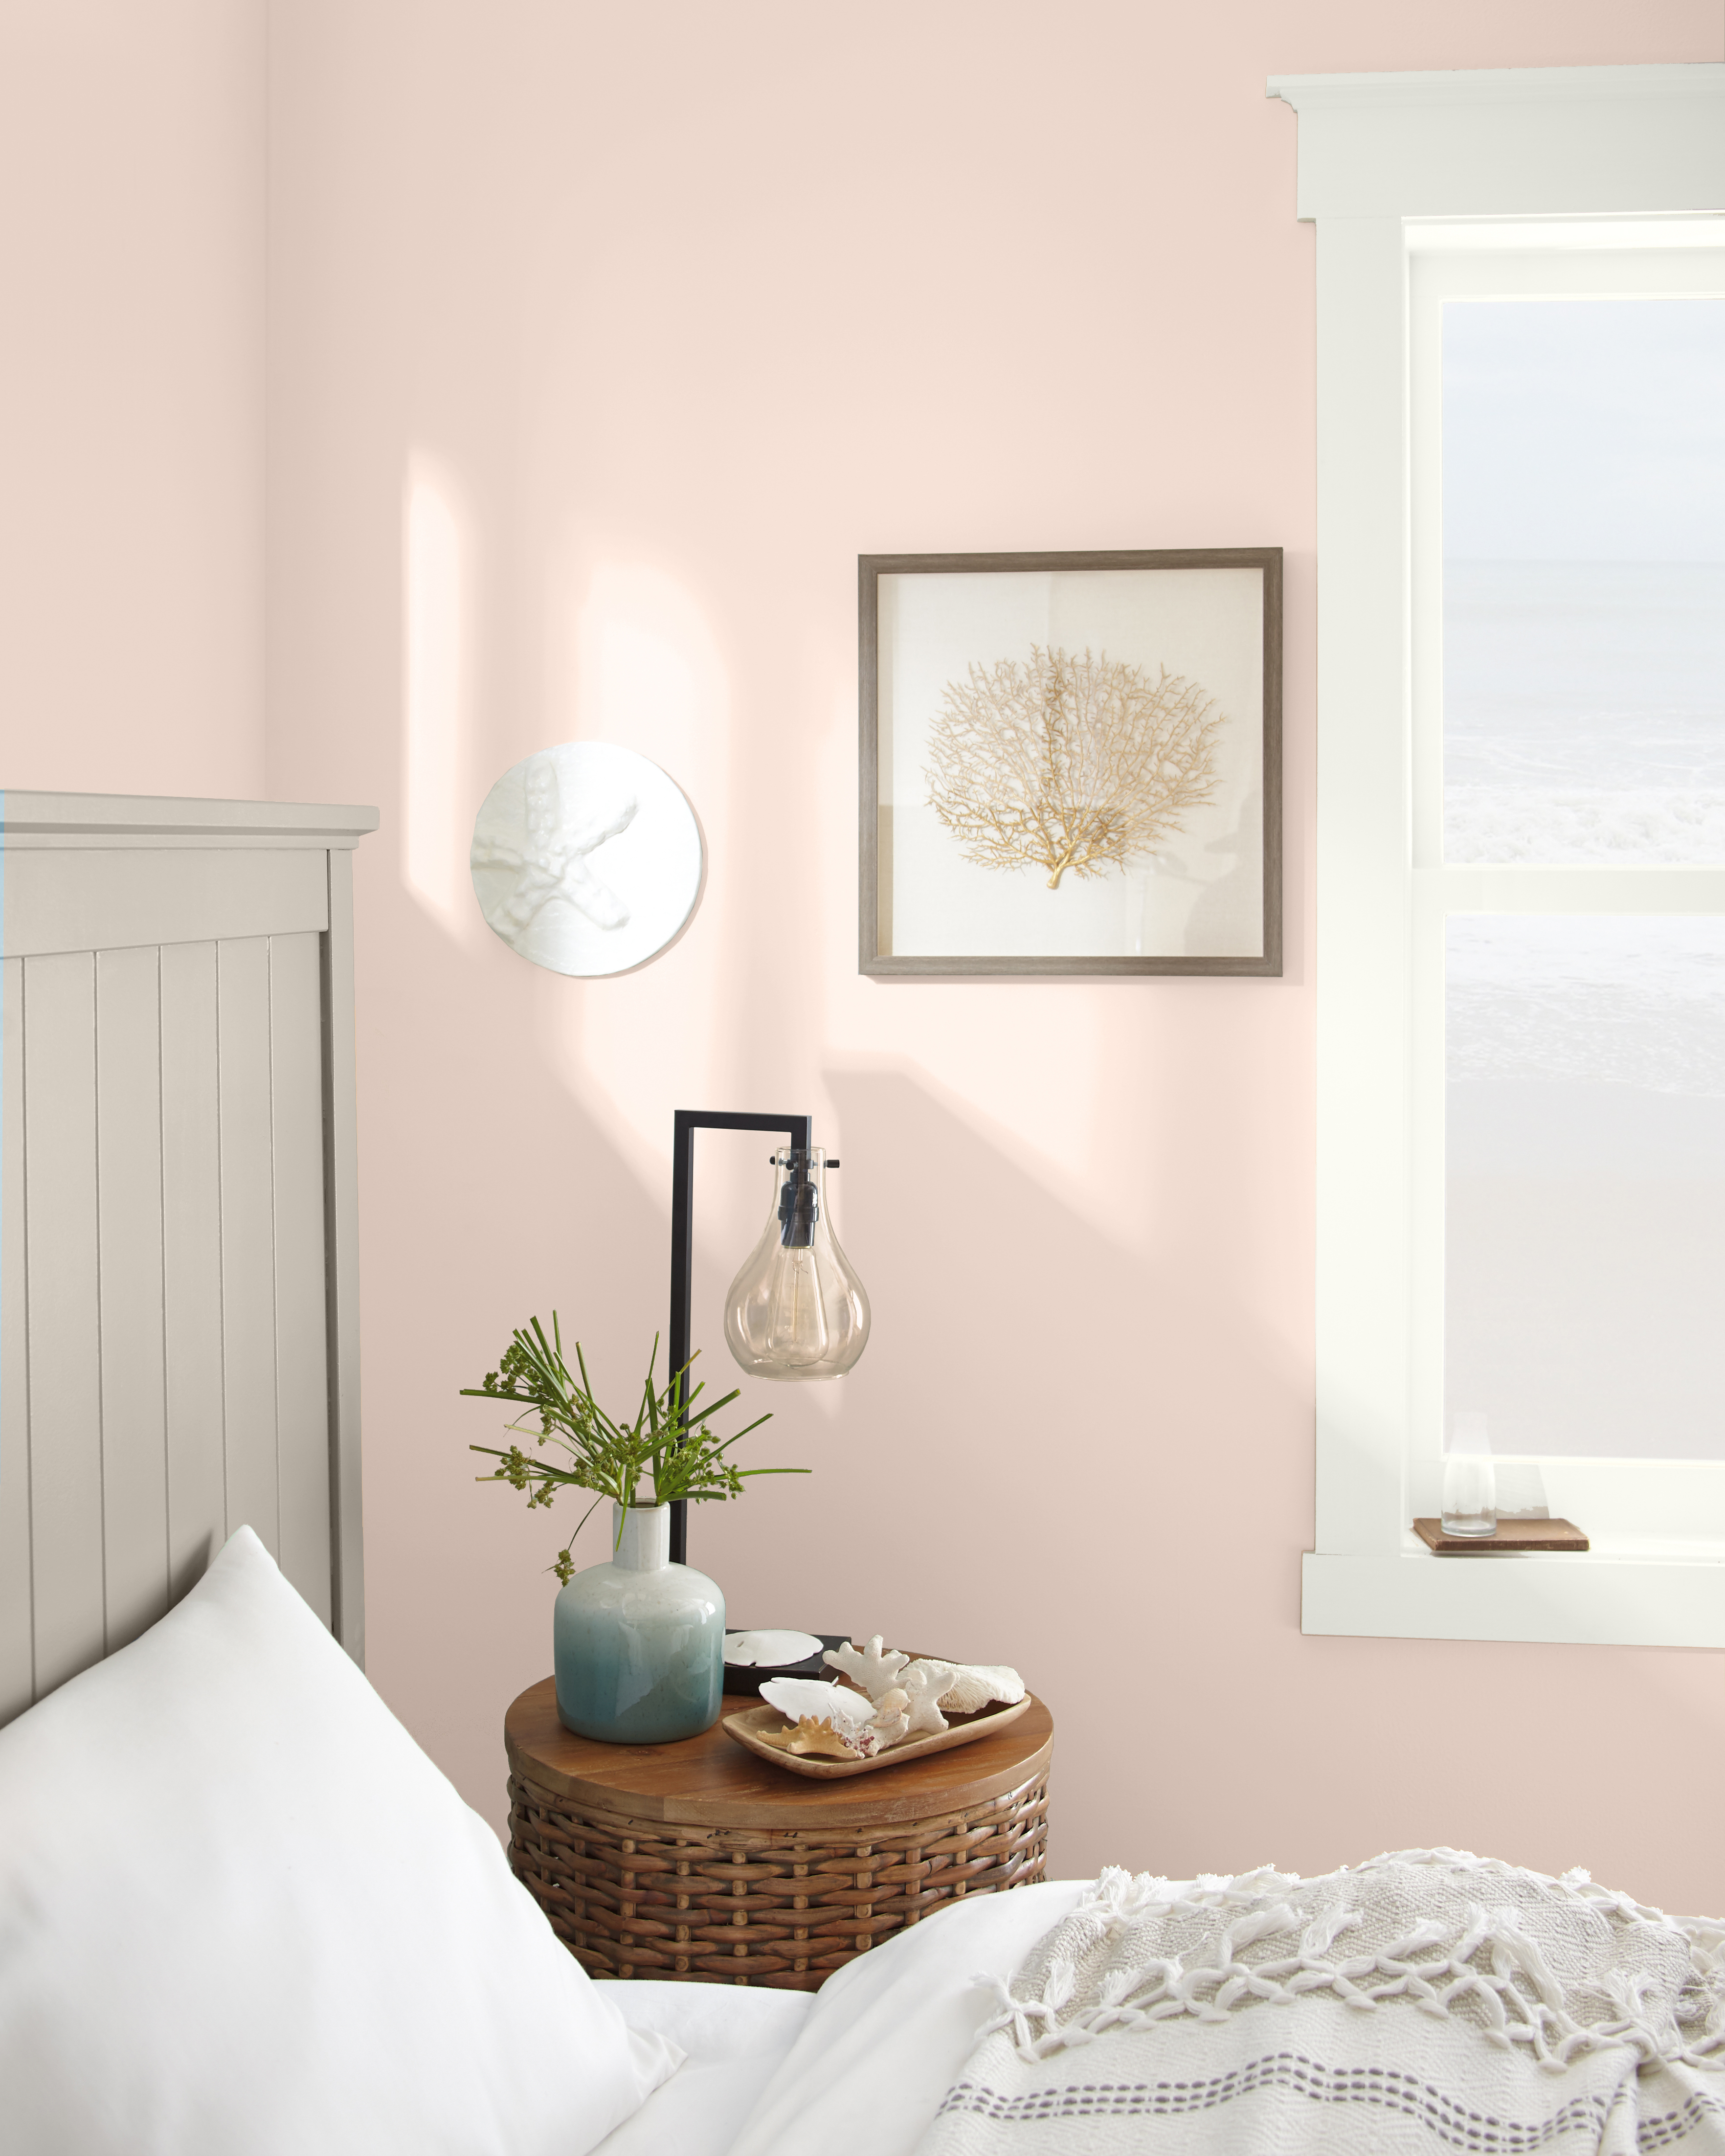 Coastal inspired bedroom image with walls in a light pink. Neutral tones are used throughout bedroom.